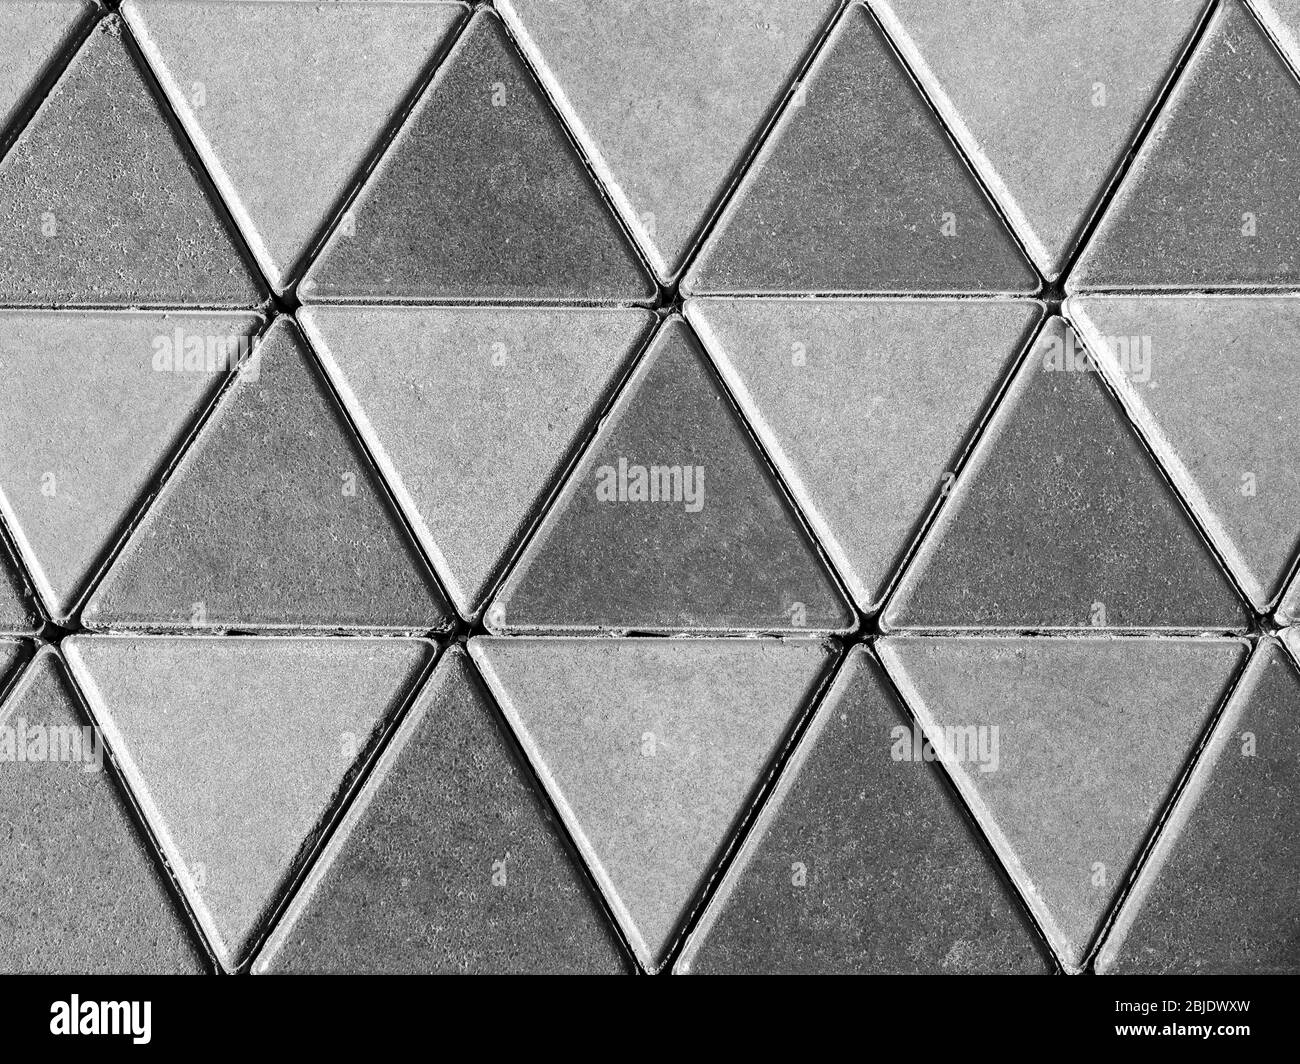 Grey Concrete Floor Triangle Pattern Background Close Up Cement Tiles Floor Texture Stock Photo Alamy